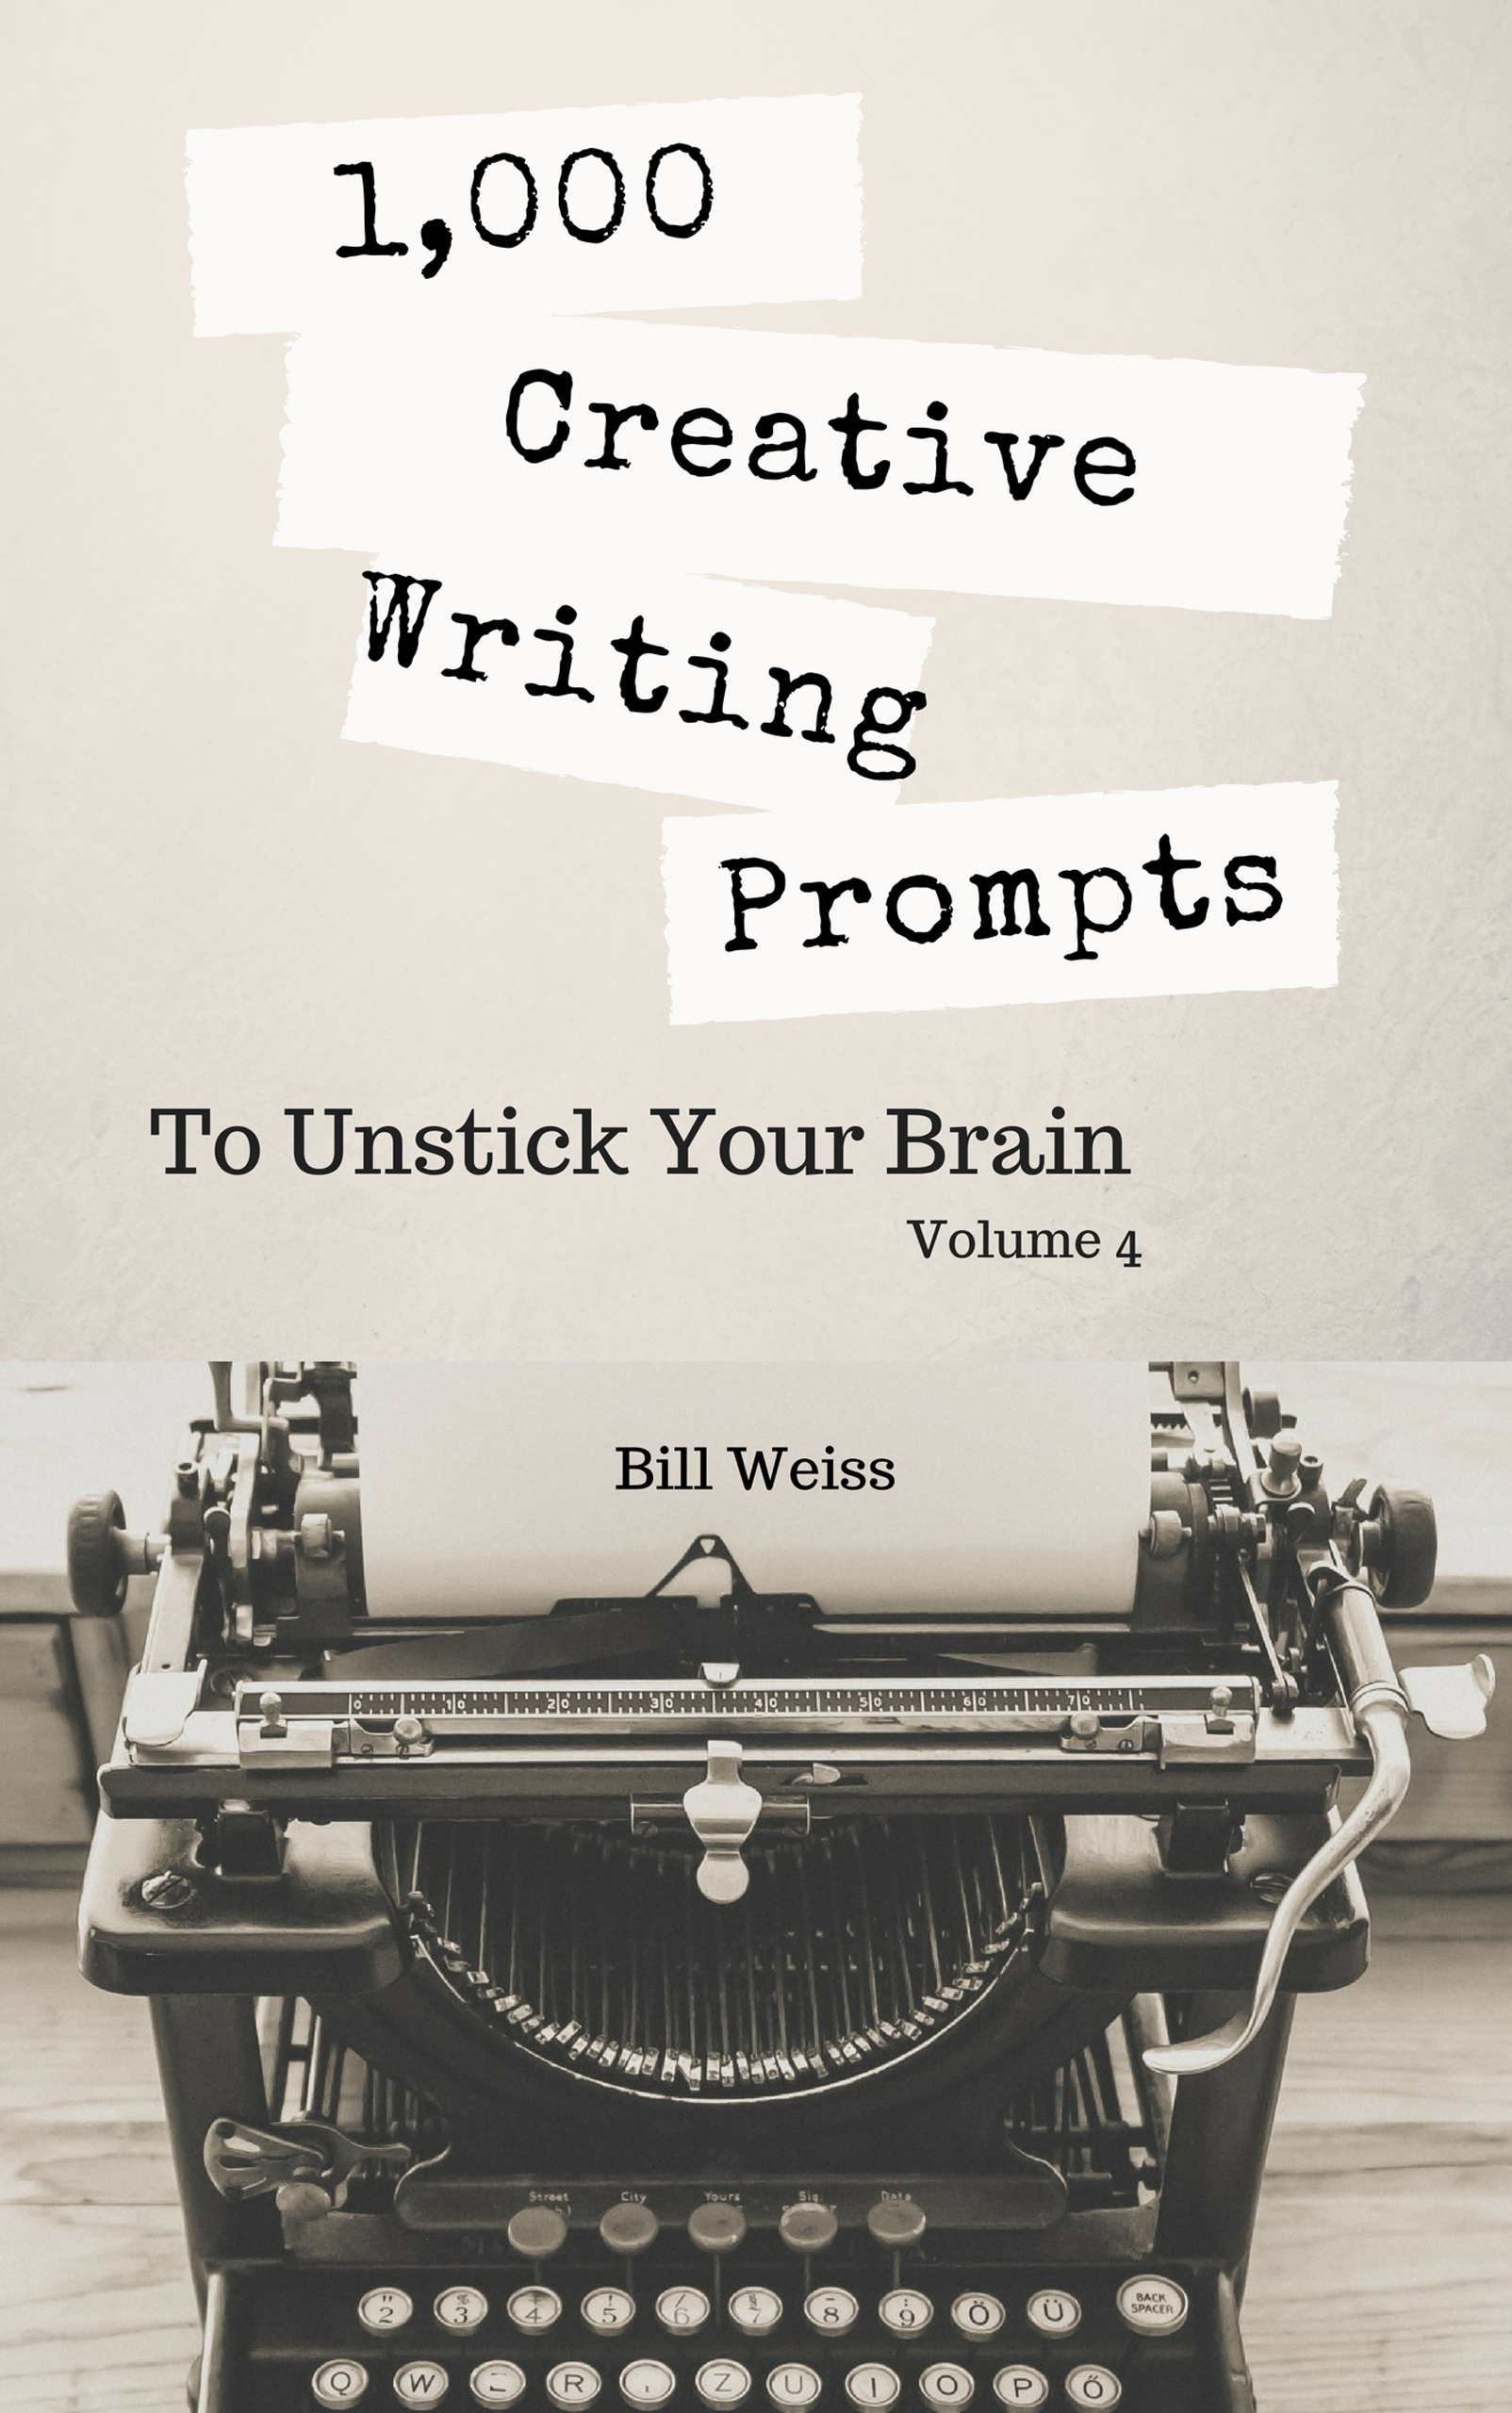 book of creative writing prompts